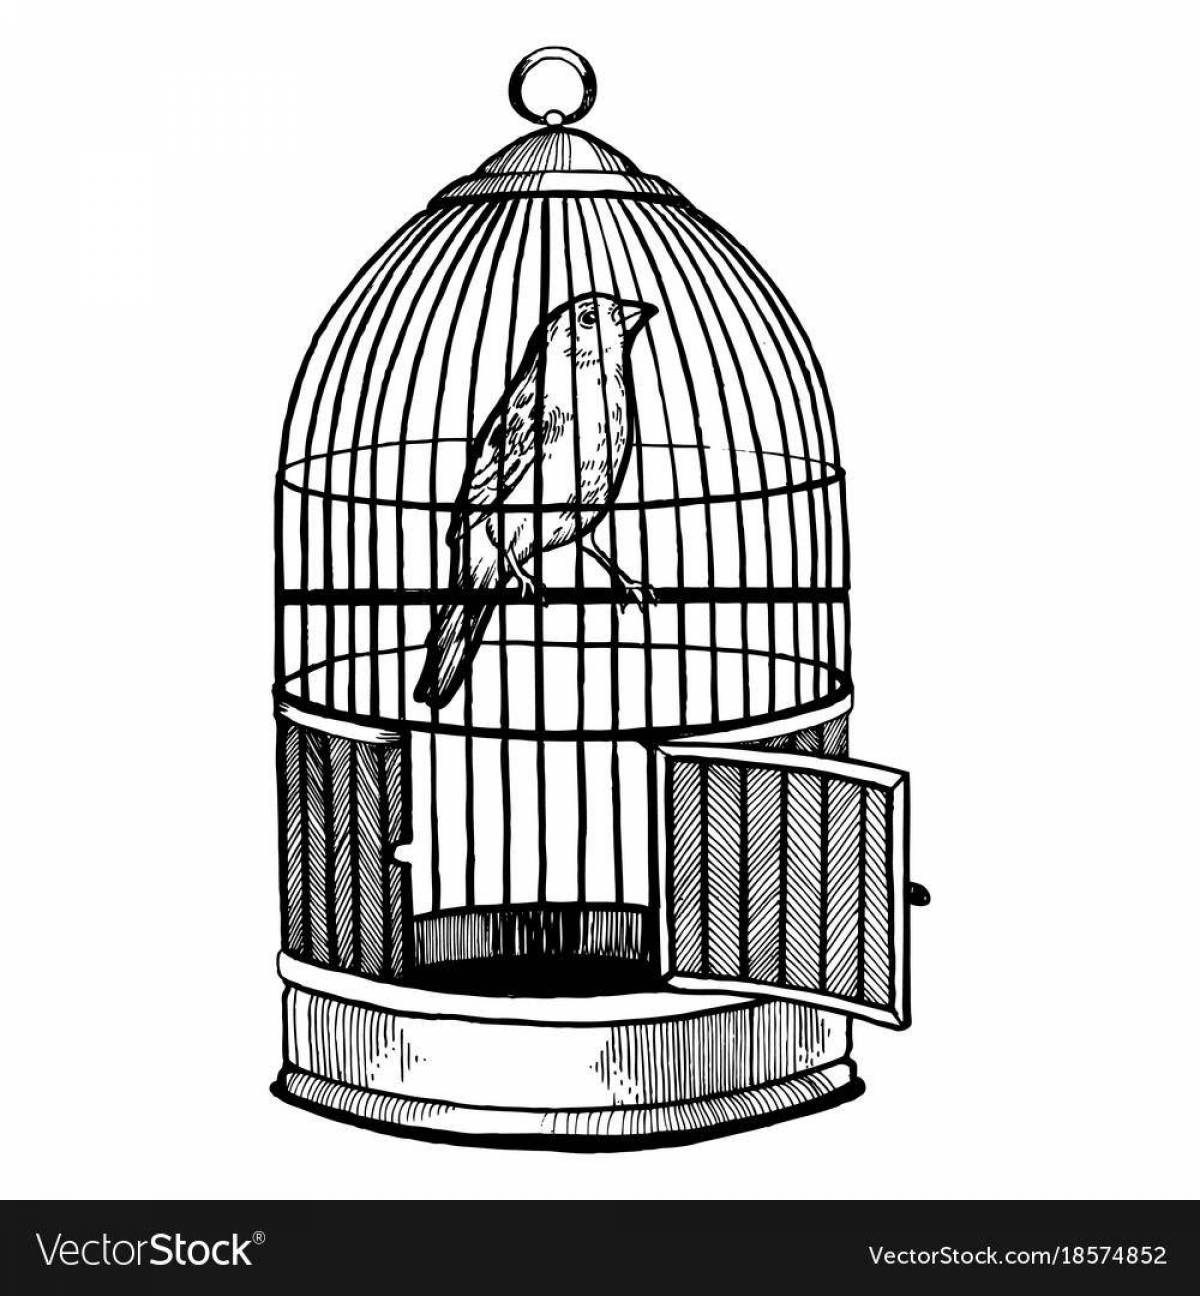 Animated parrot in a cage